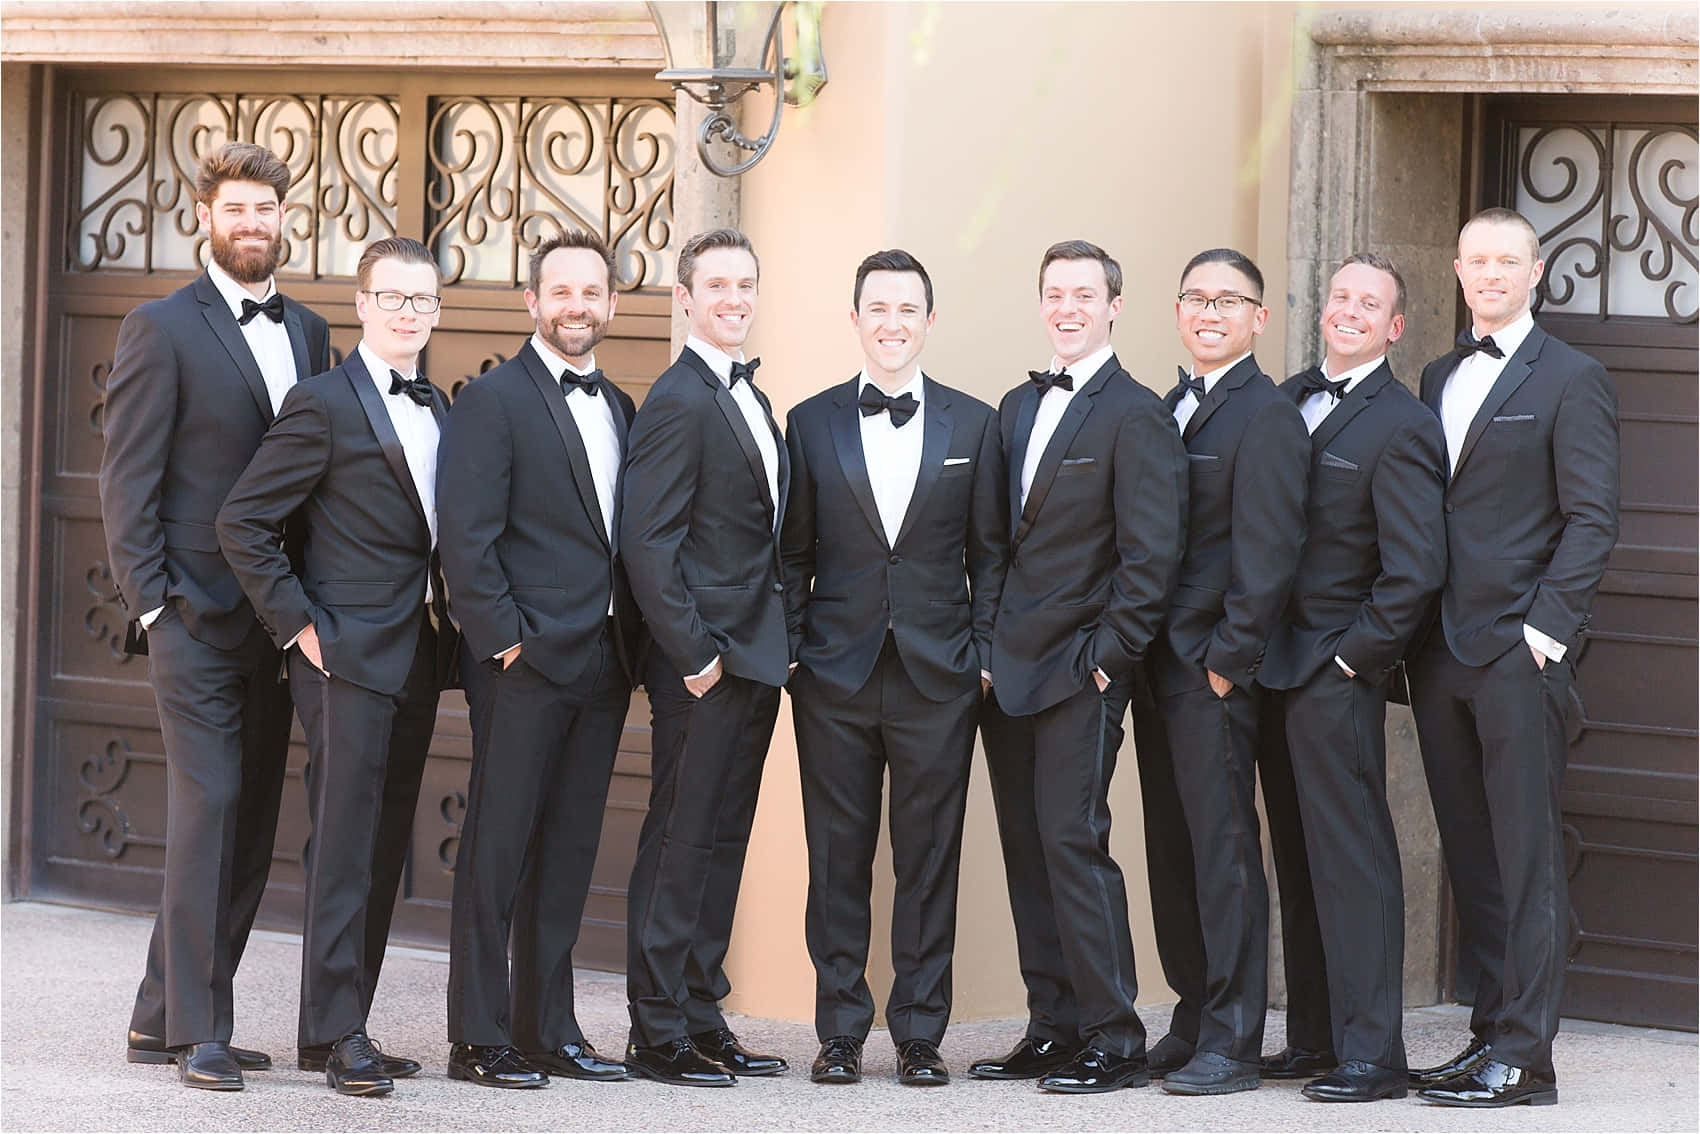 Groomsmen Posing for a Group Picture on the Big Day